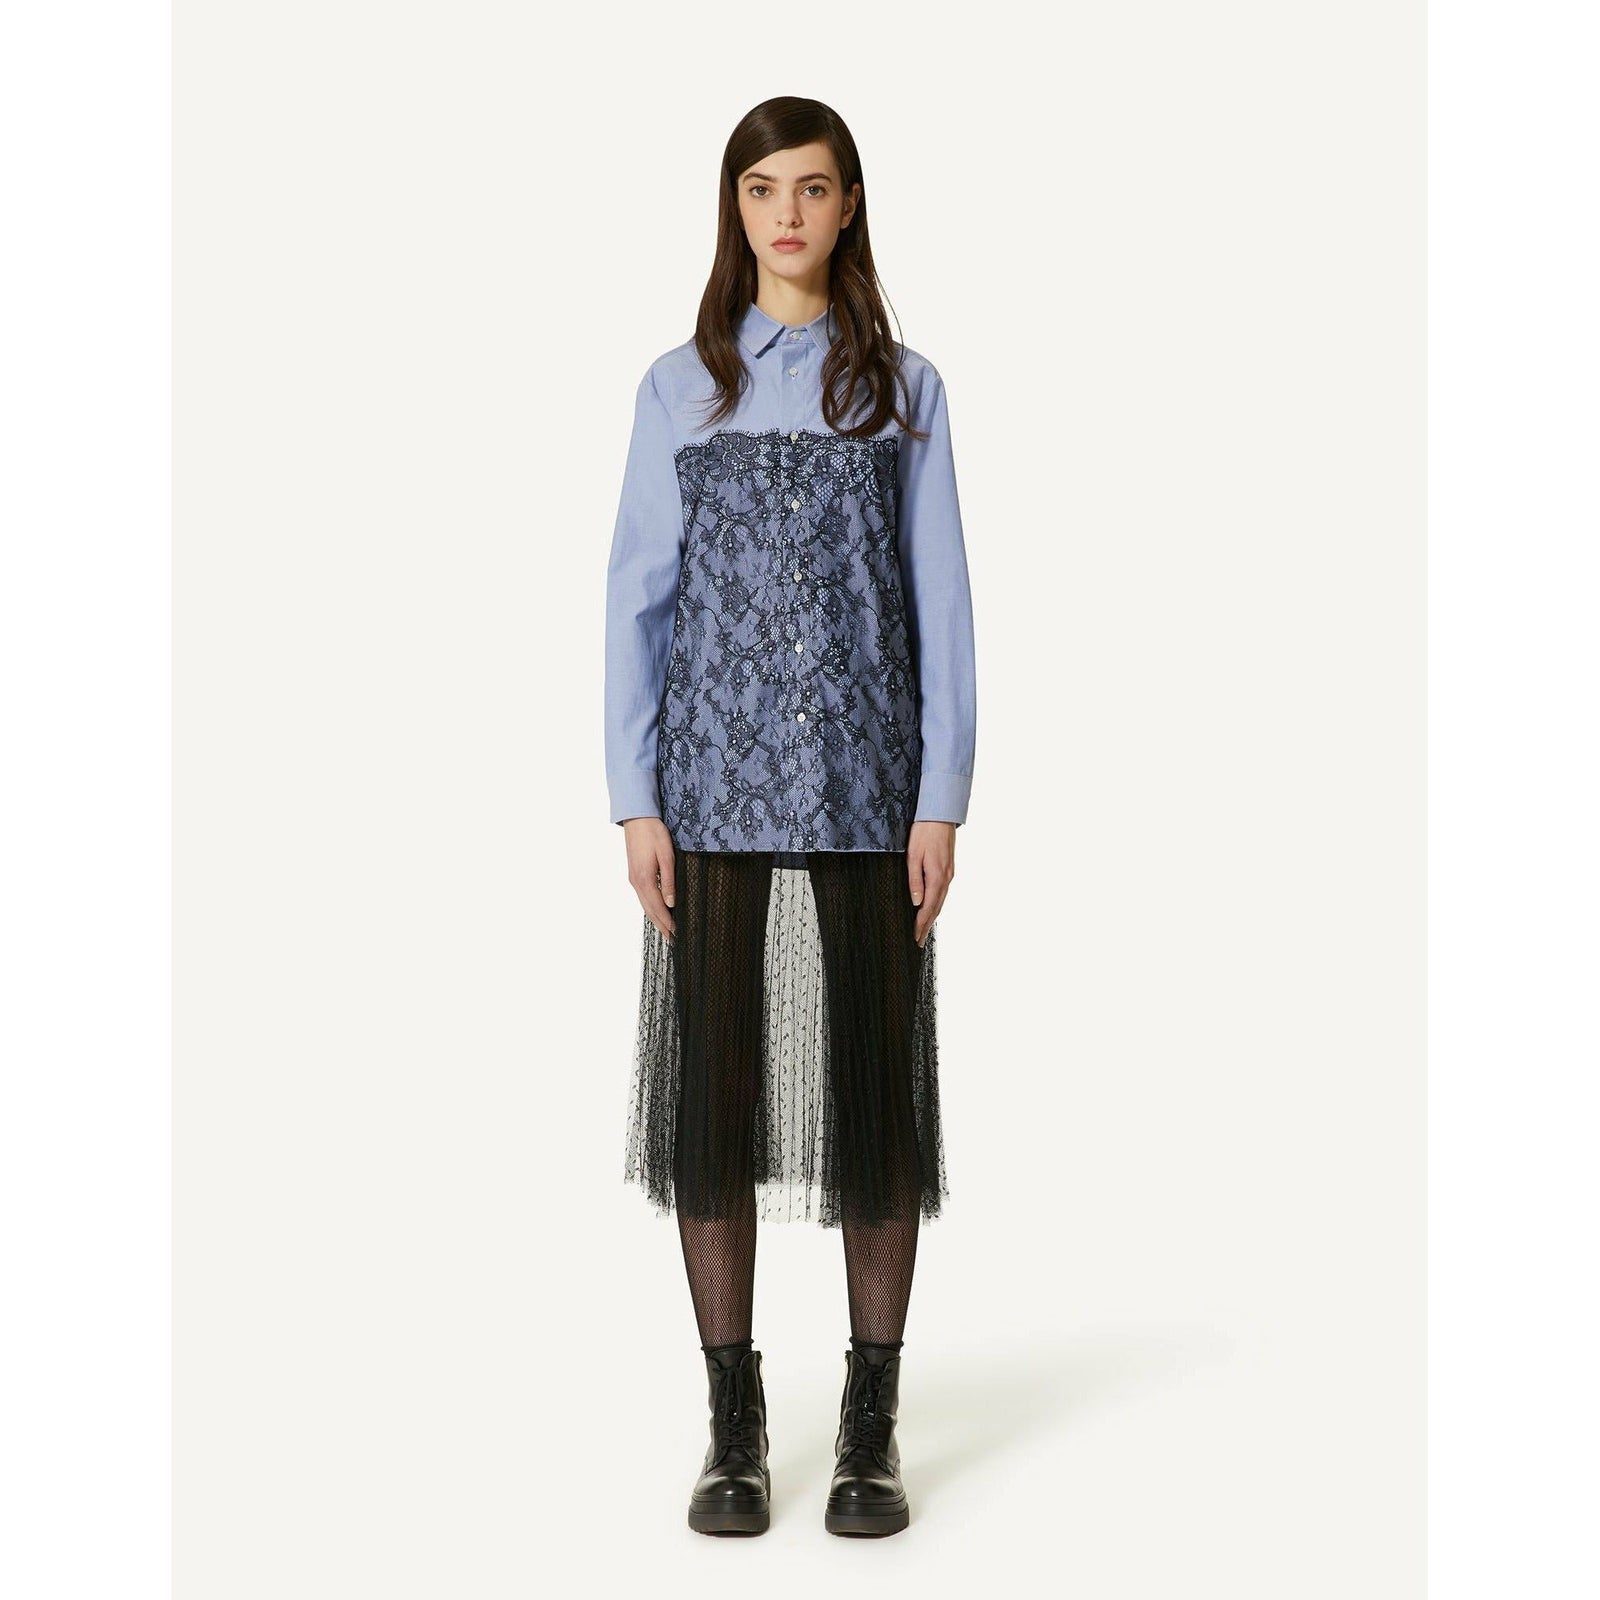 OXFORD AND LACE SHIRT - Yooto